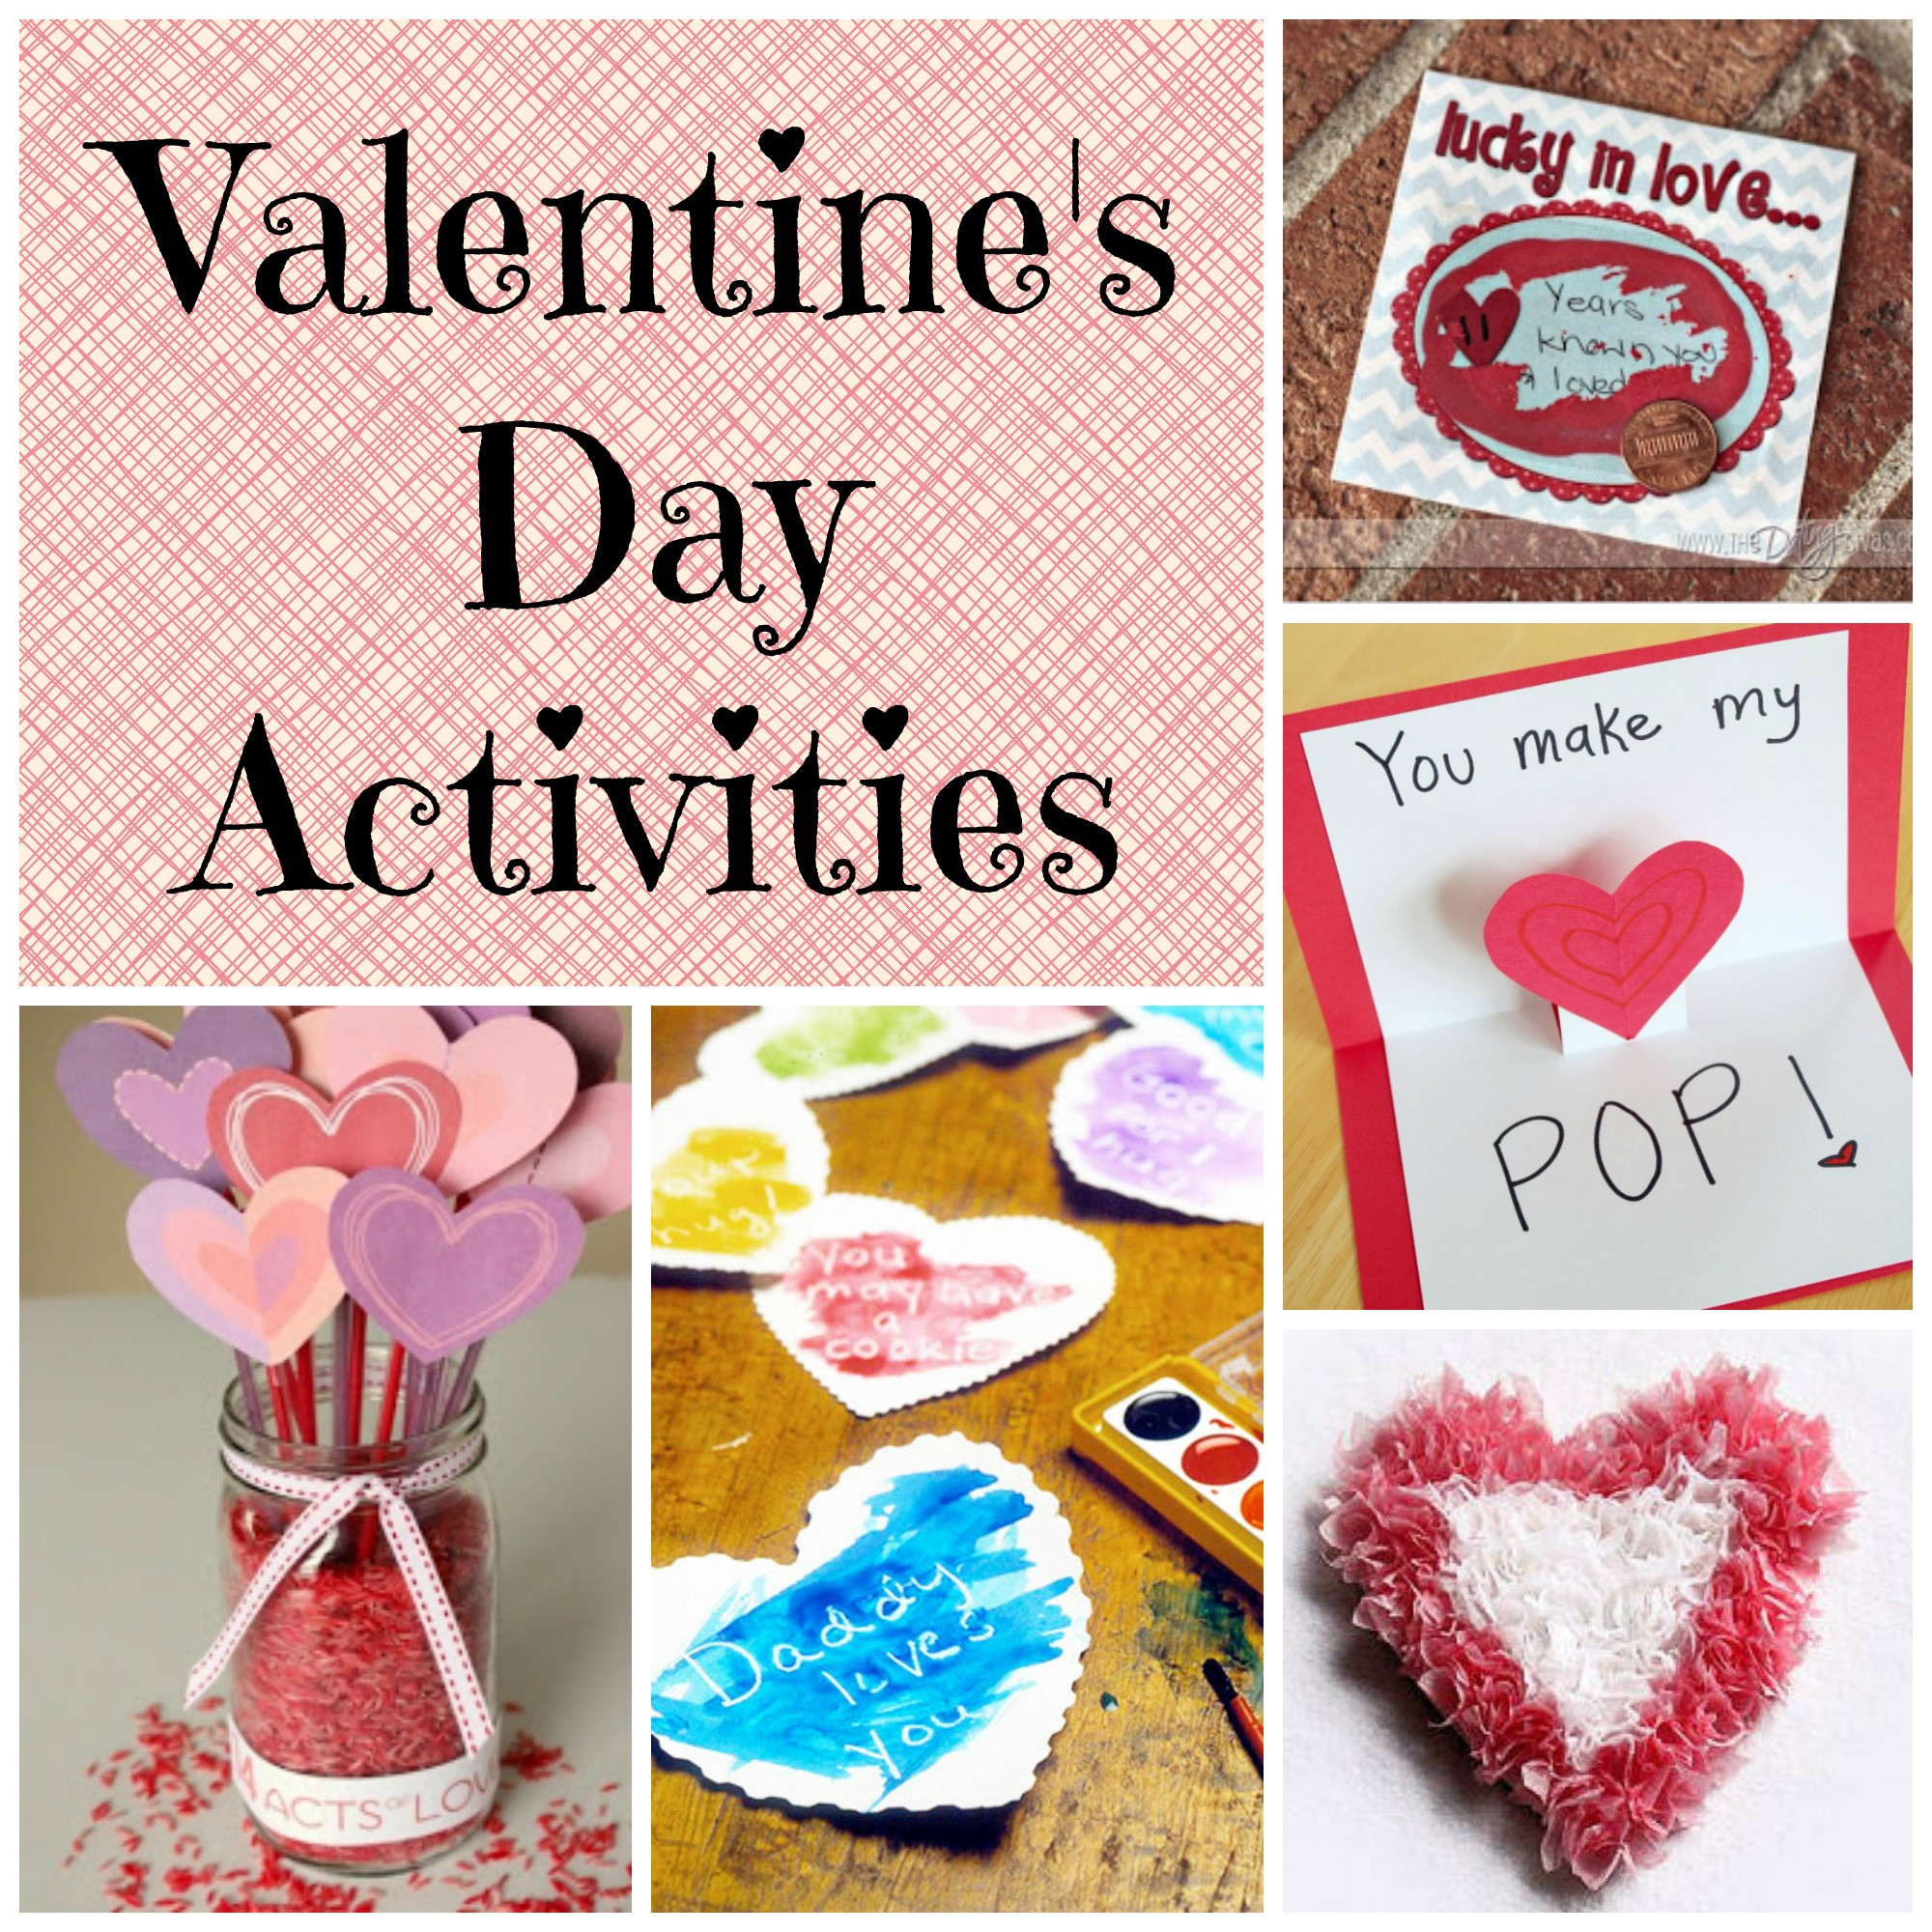 Fun Ideas For Valentines Day
 Frugal Ideas Archives Saving Cent by Cent